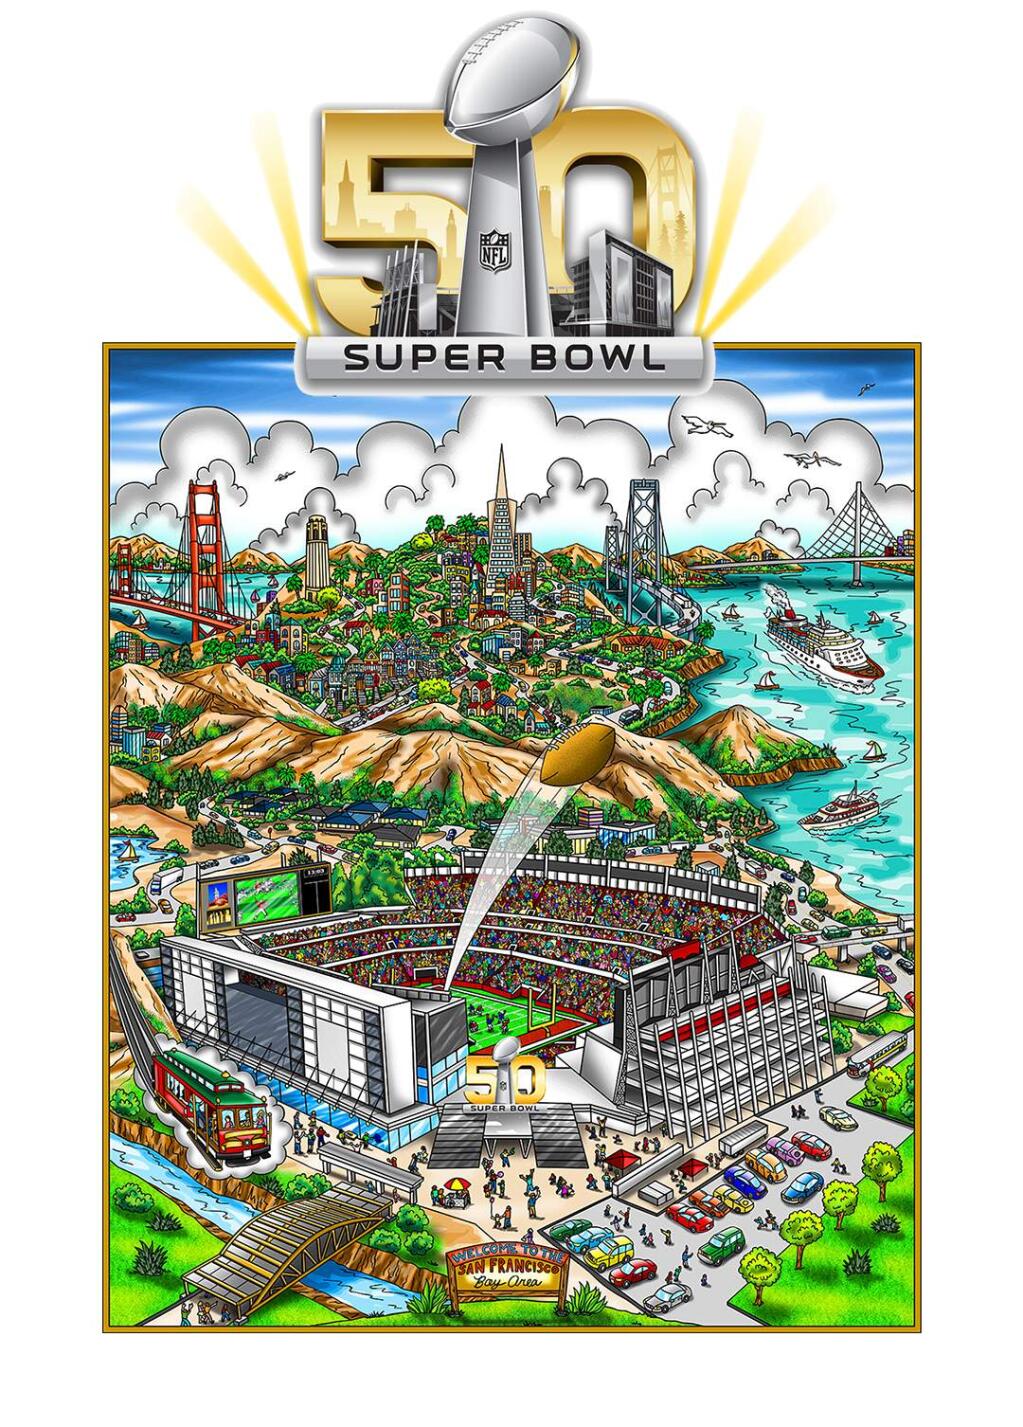 One of the posters created for Super Bowl 50.